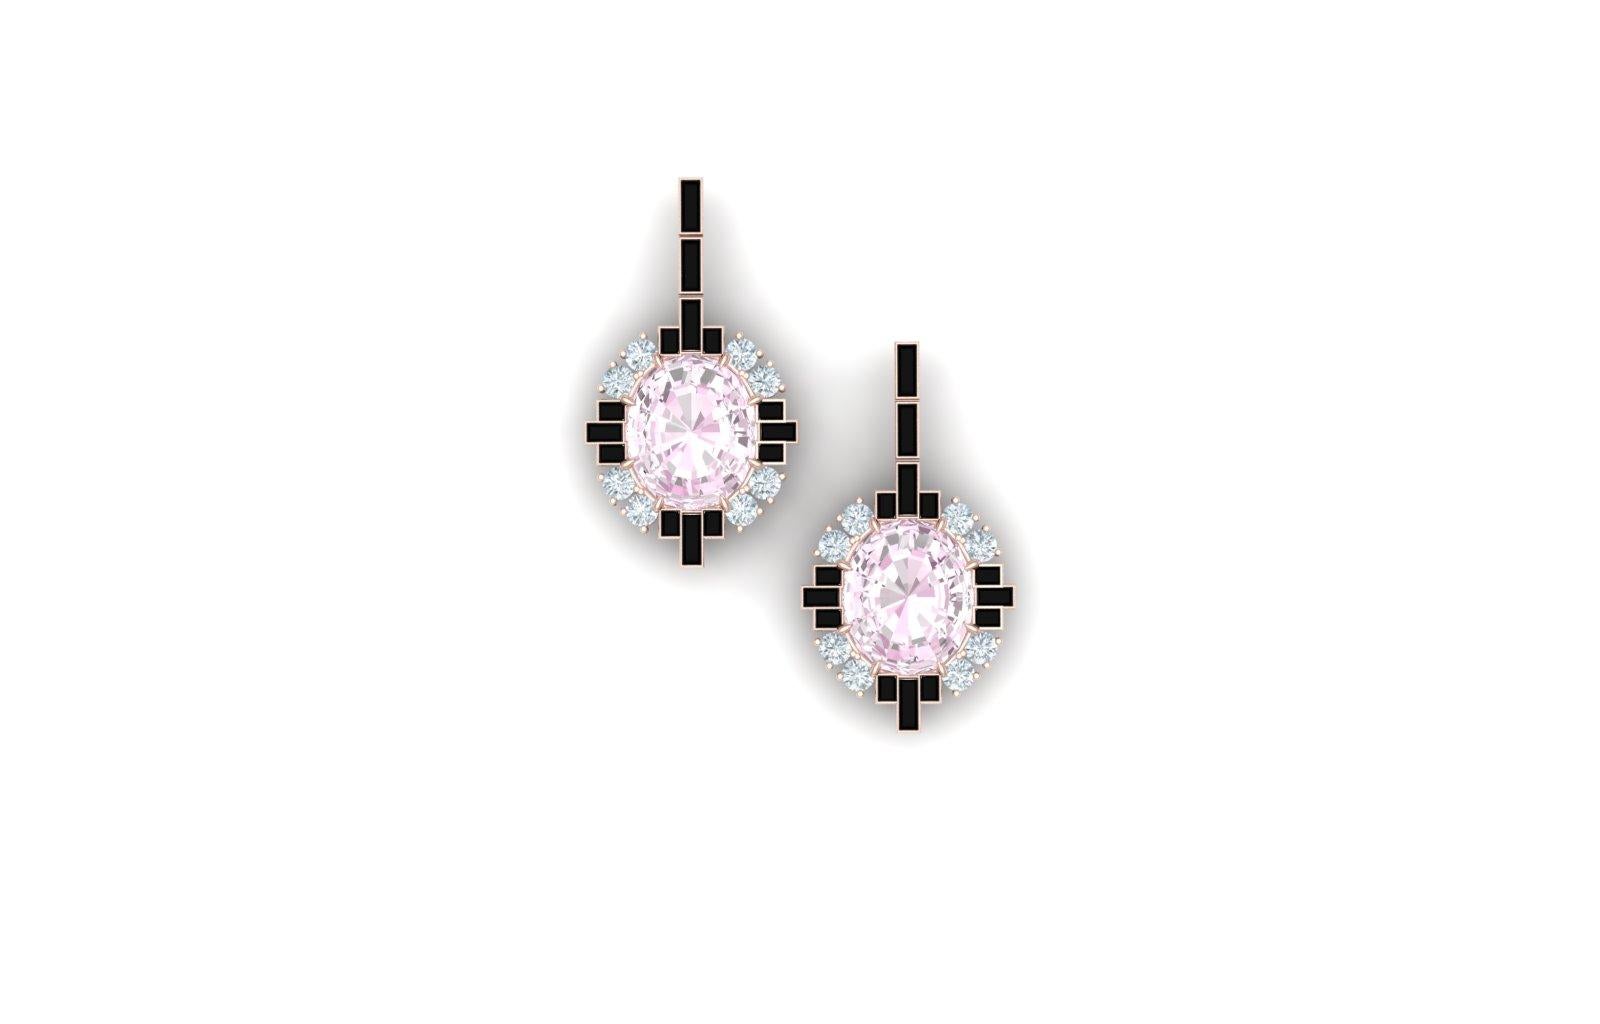 These modern earrings have a the combination of light pastel pink and contrasted with the stark black onyx.  These earrings have a center stone that is oval cut and weighs 1.5 carats each.  The center stone is complemented by 1.2 carats of baguette